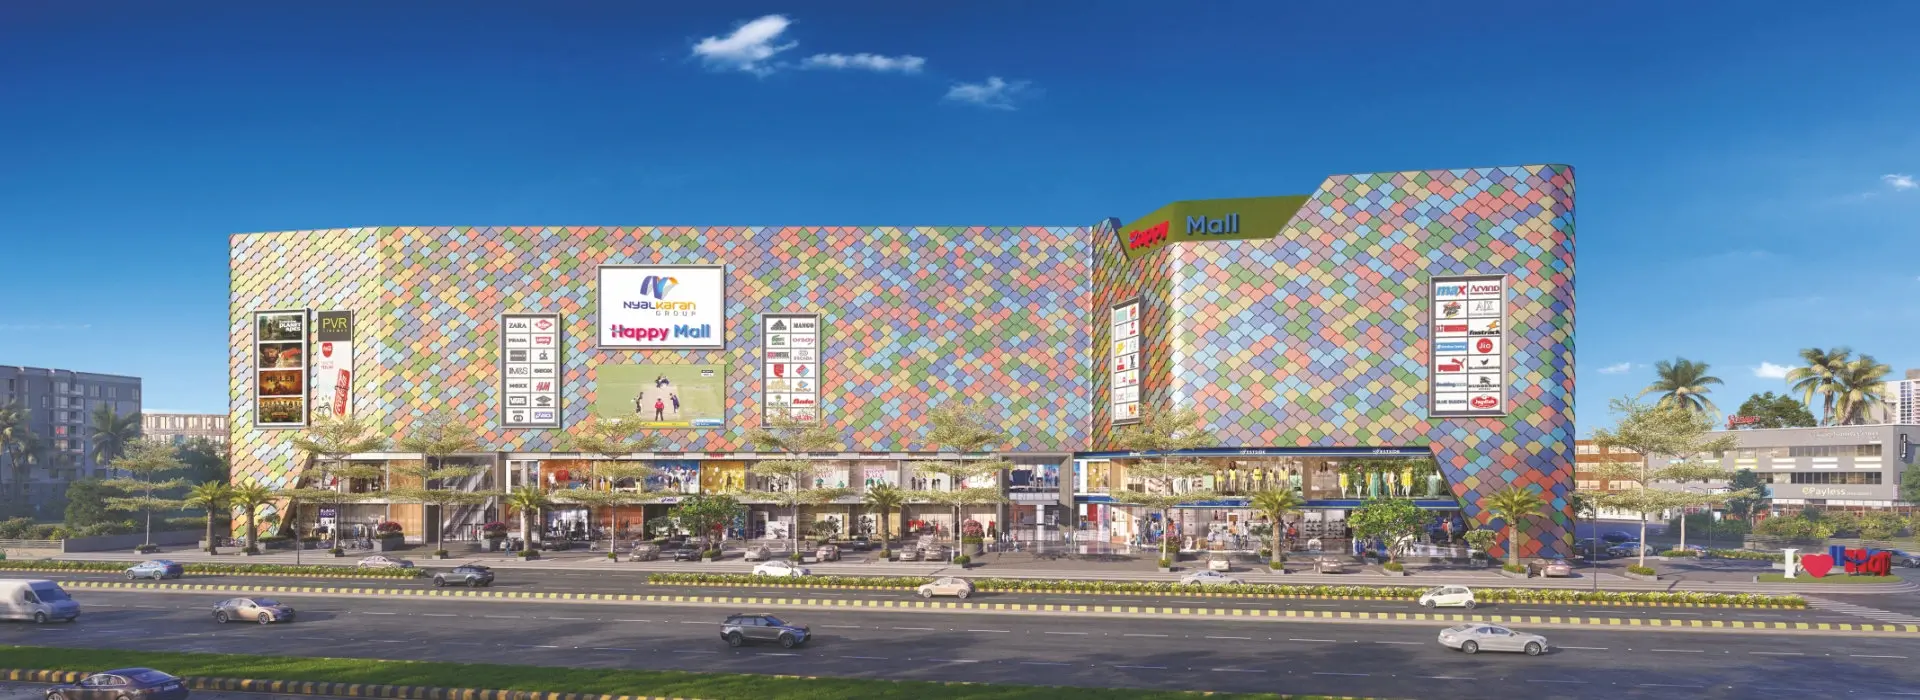 Largest mall in vadodara - Happy Mall